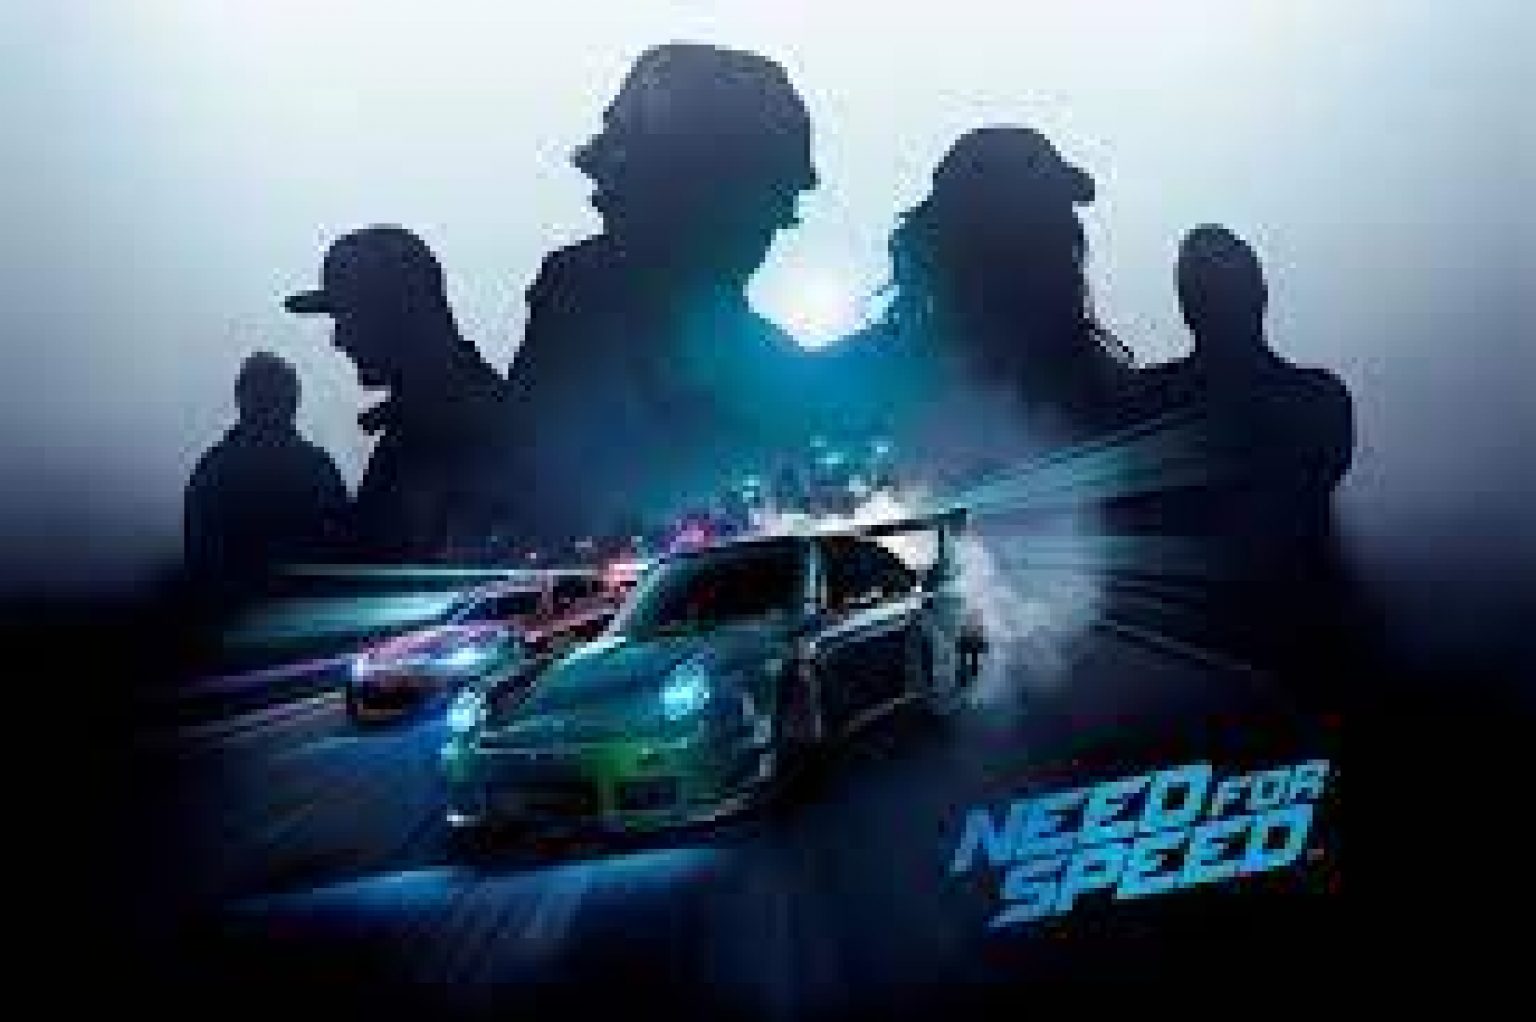 nfs payback for pc highly compressed